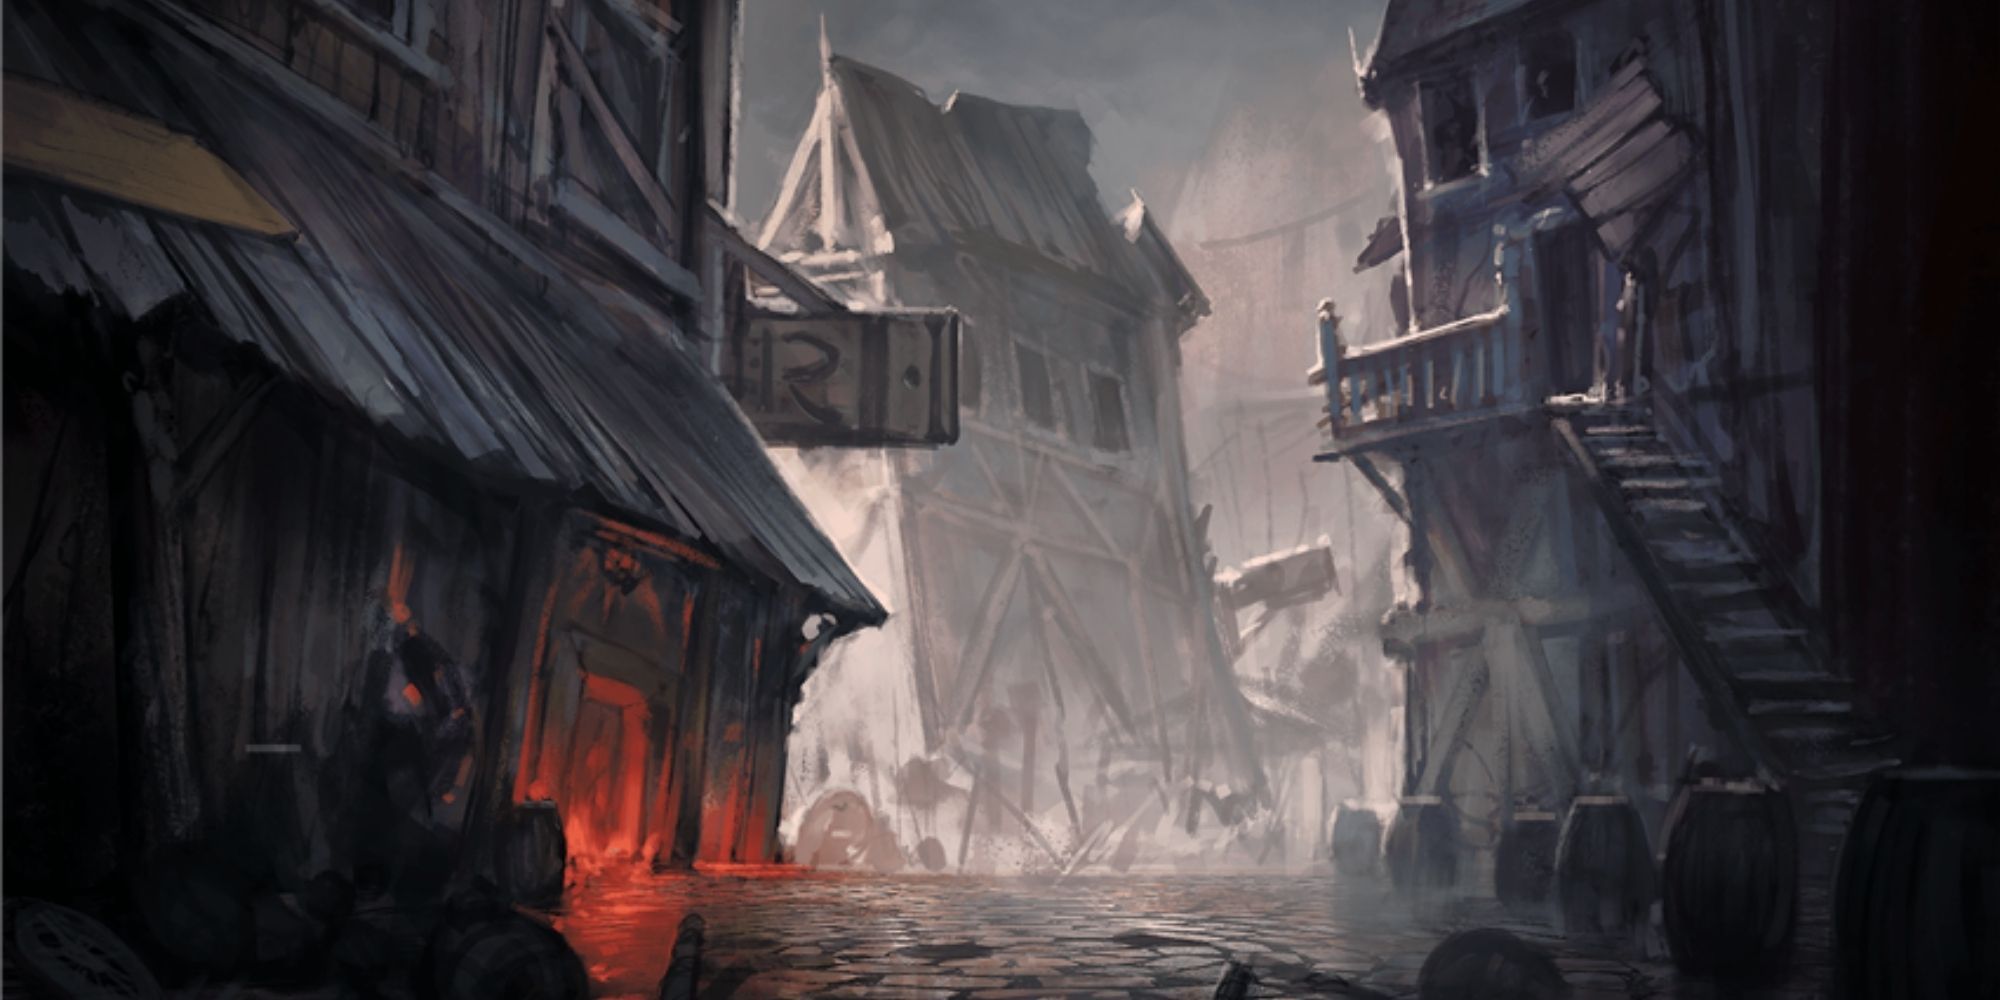 D&D Storm Lord's Wrath Destroyed Town Art